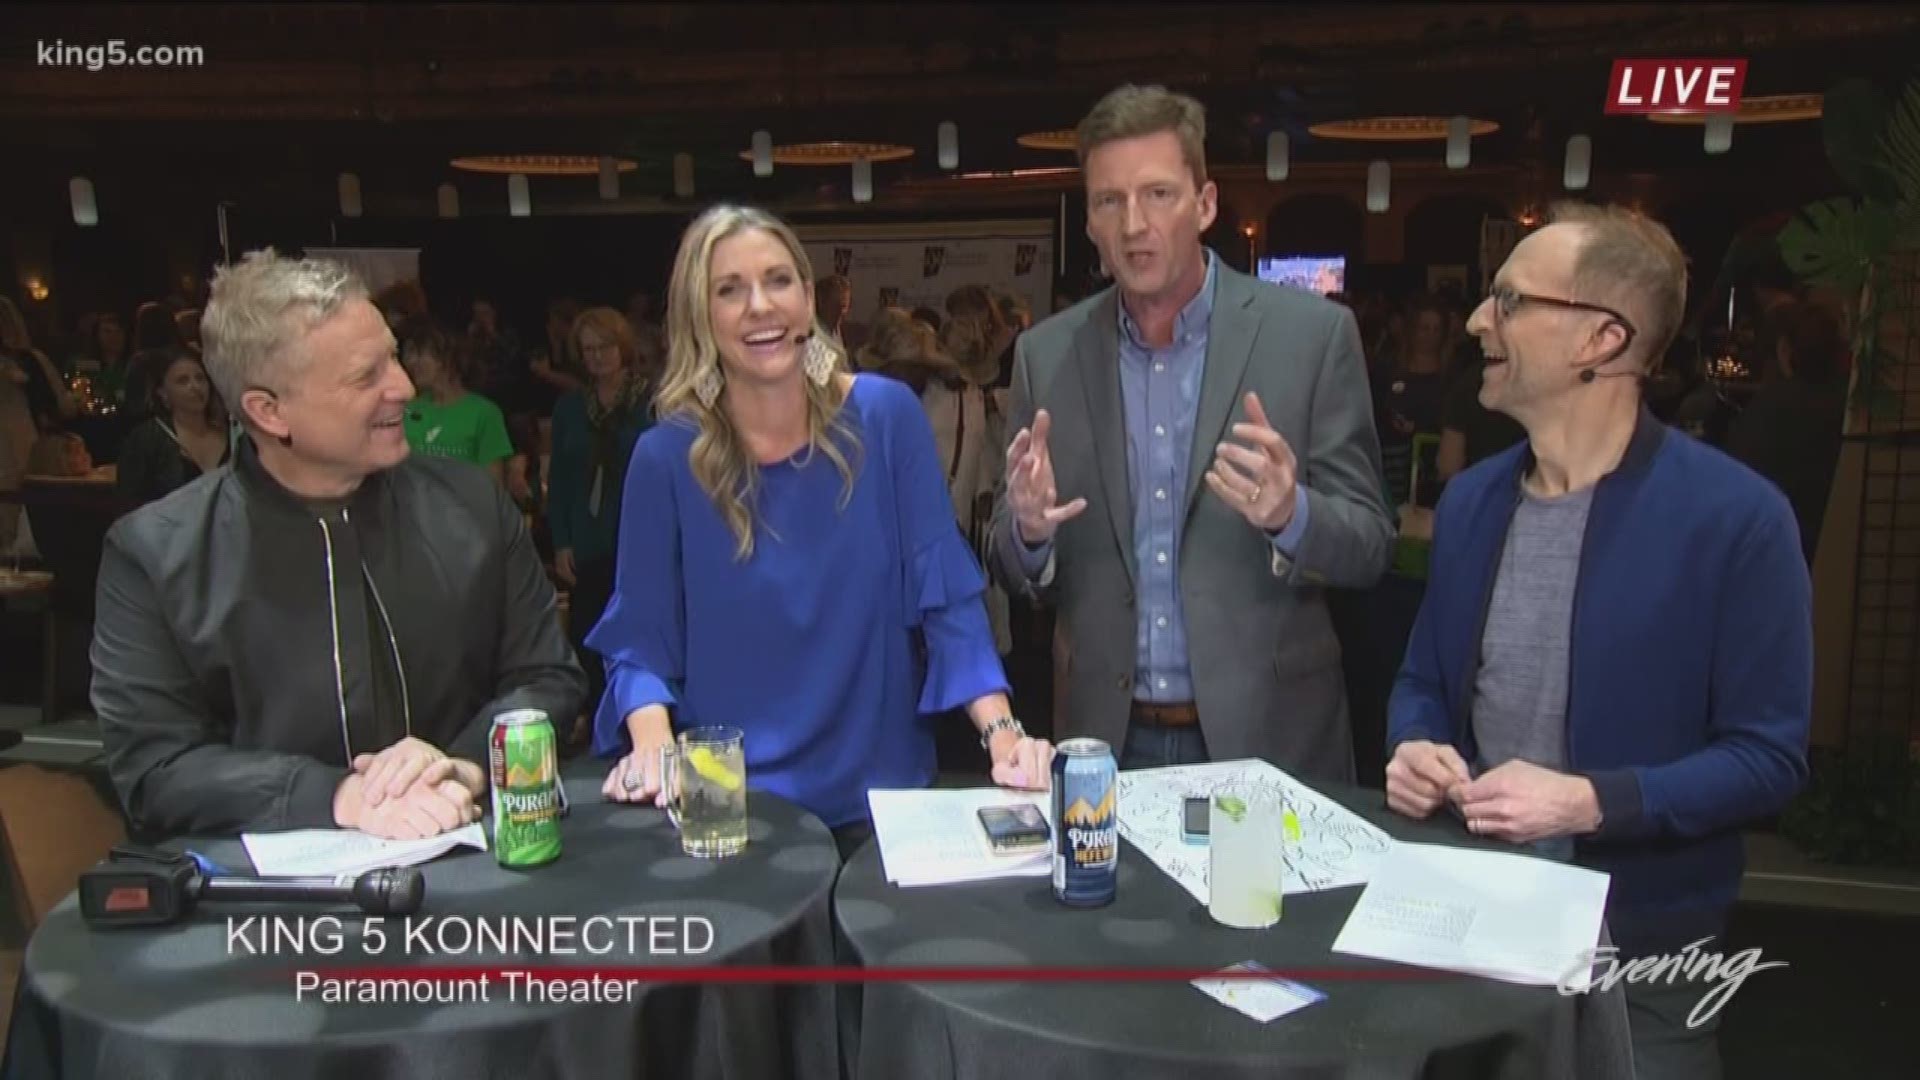 Kim, Jim, Michael, and Saint host LIVE from Seattle's Paramount Theatre.  KING 5 Konnected is the Party with a Purpose. Guests eat, drink and be merry while meeting local non-profits to explore how they can get "Konnected" with their own communities. Sponsored by Premera and ReachNow.